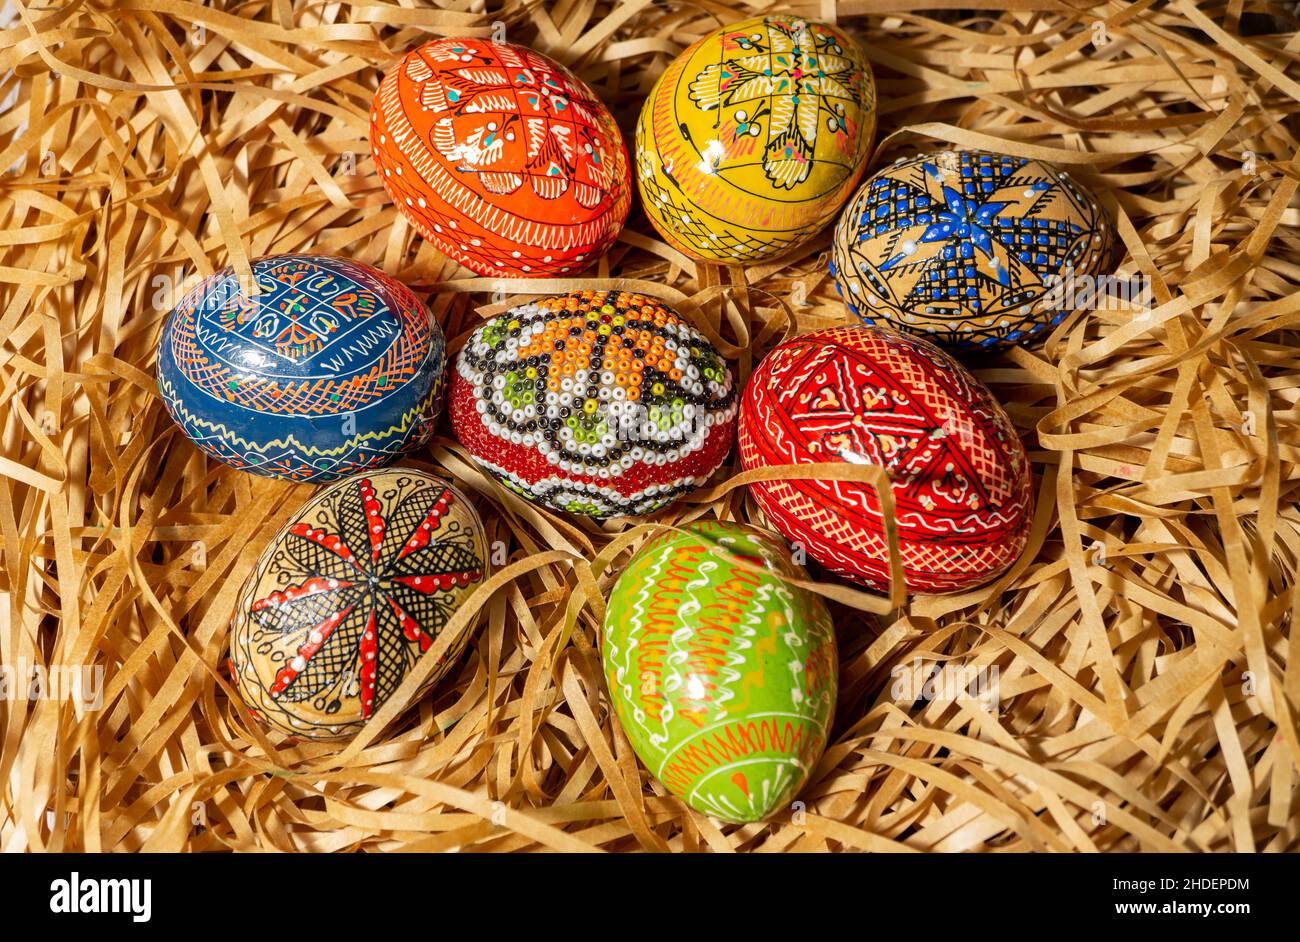 Closeup of colorful hand-painted eggs represenint 7 styles from different regions of Romania Stock Photo